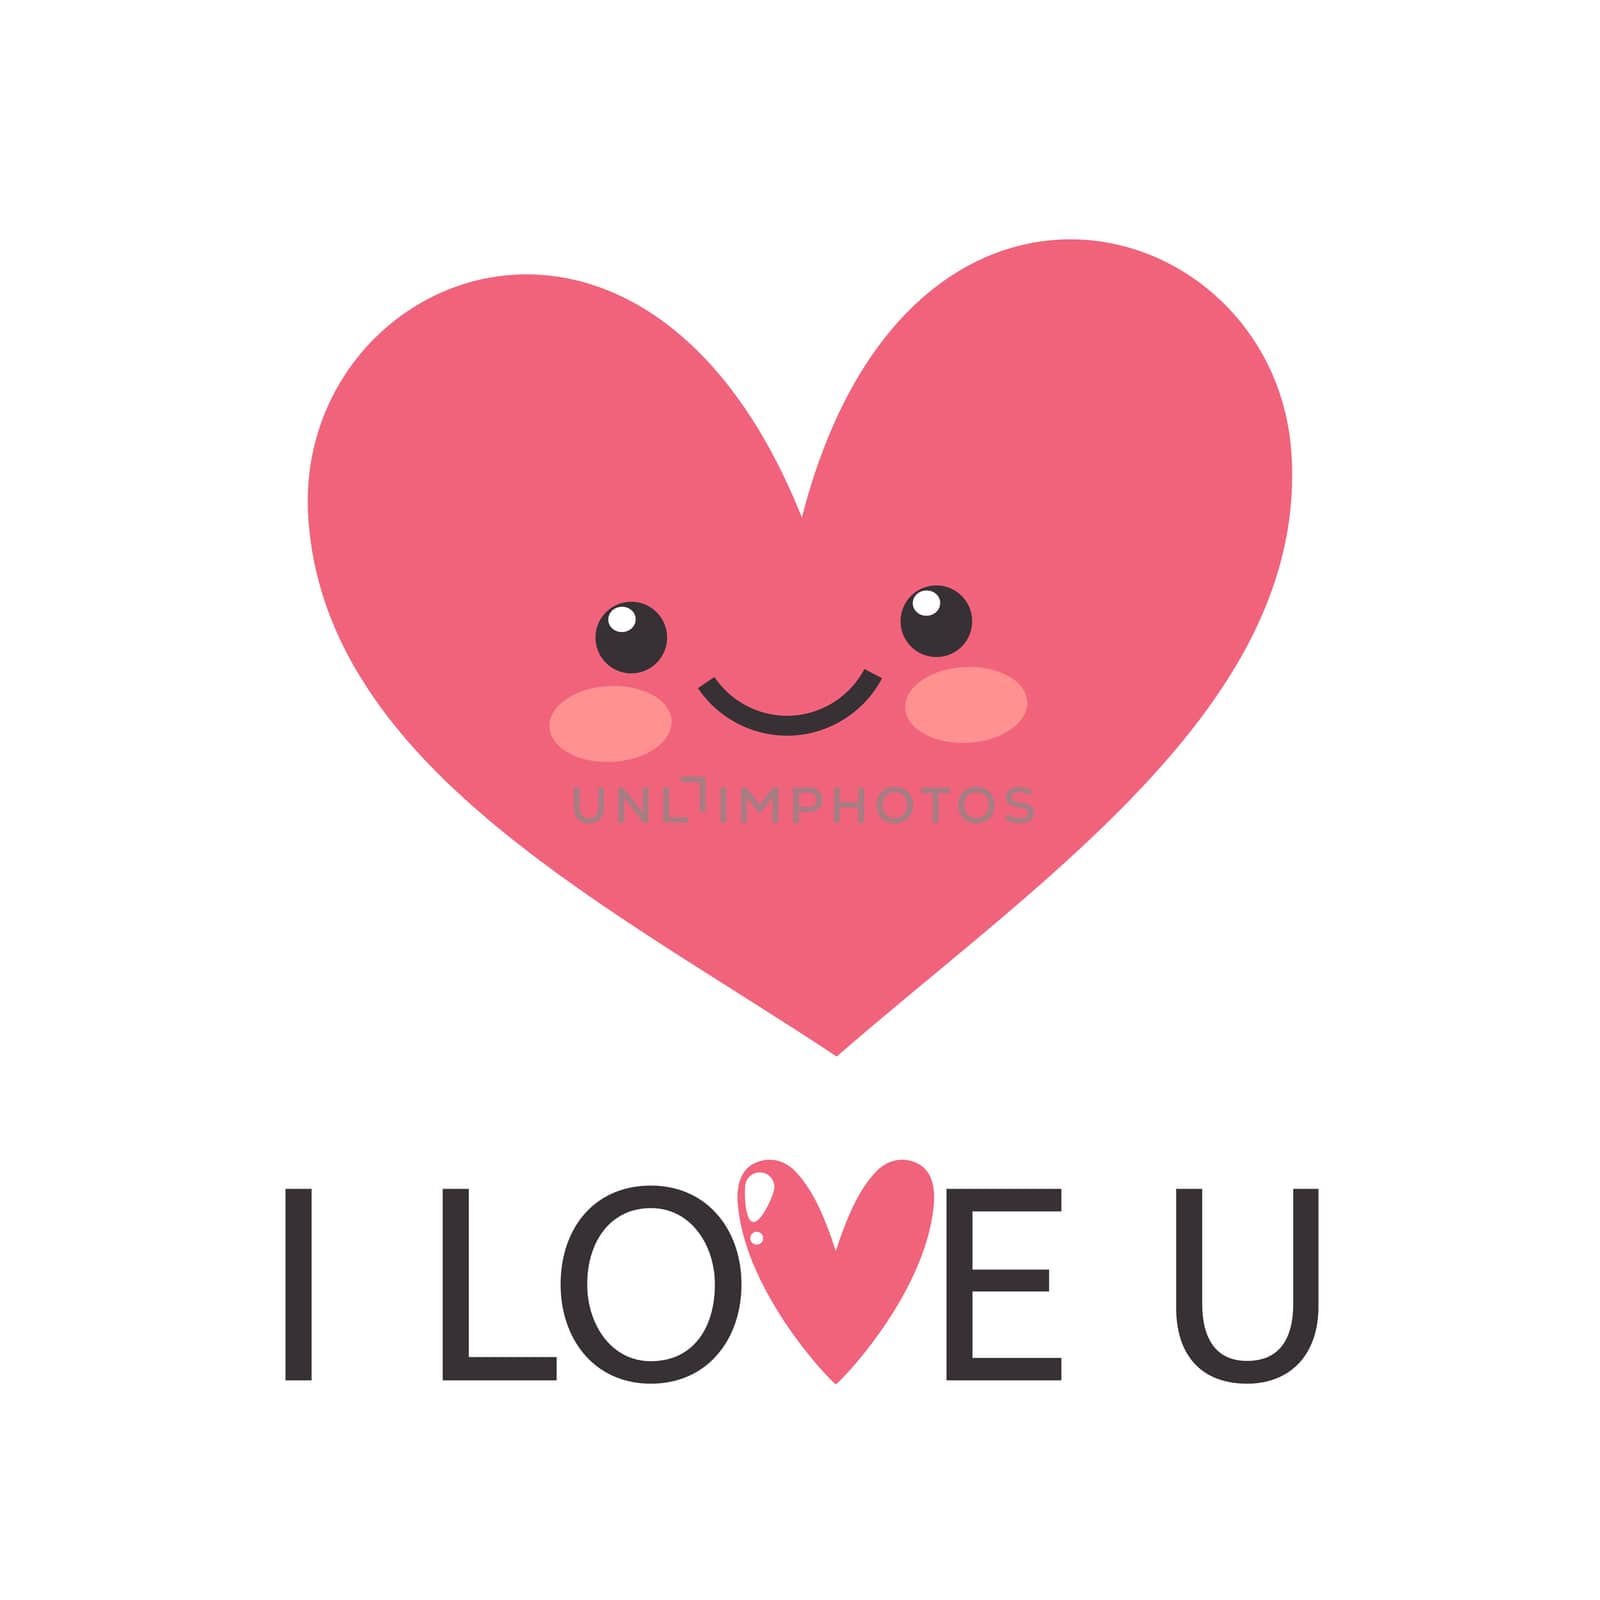 Happy Valentines Day greating card. Inscription I love you and happy heart on a white background. Illustration for Happy valentines day and weeding design project.